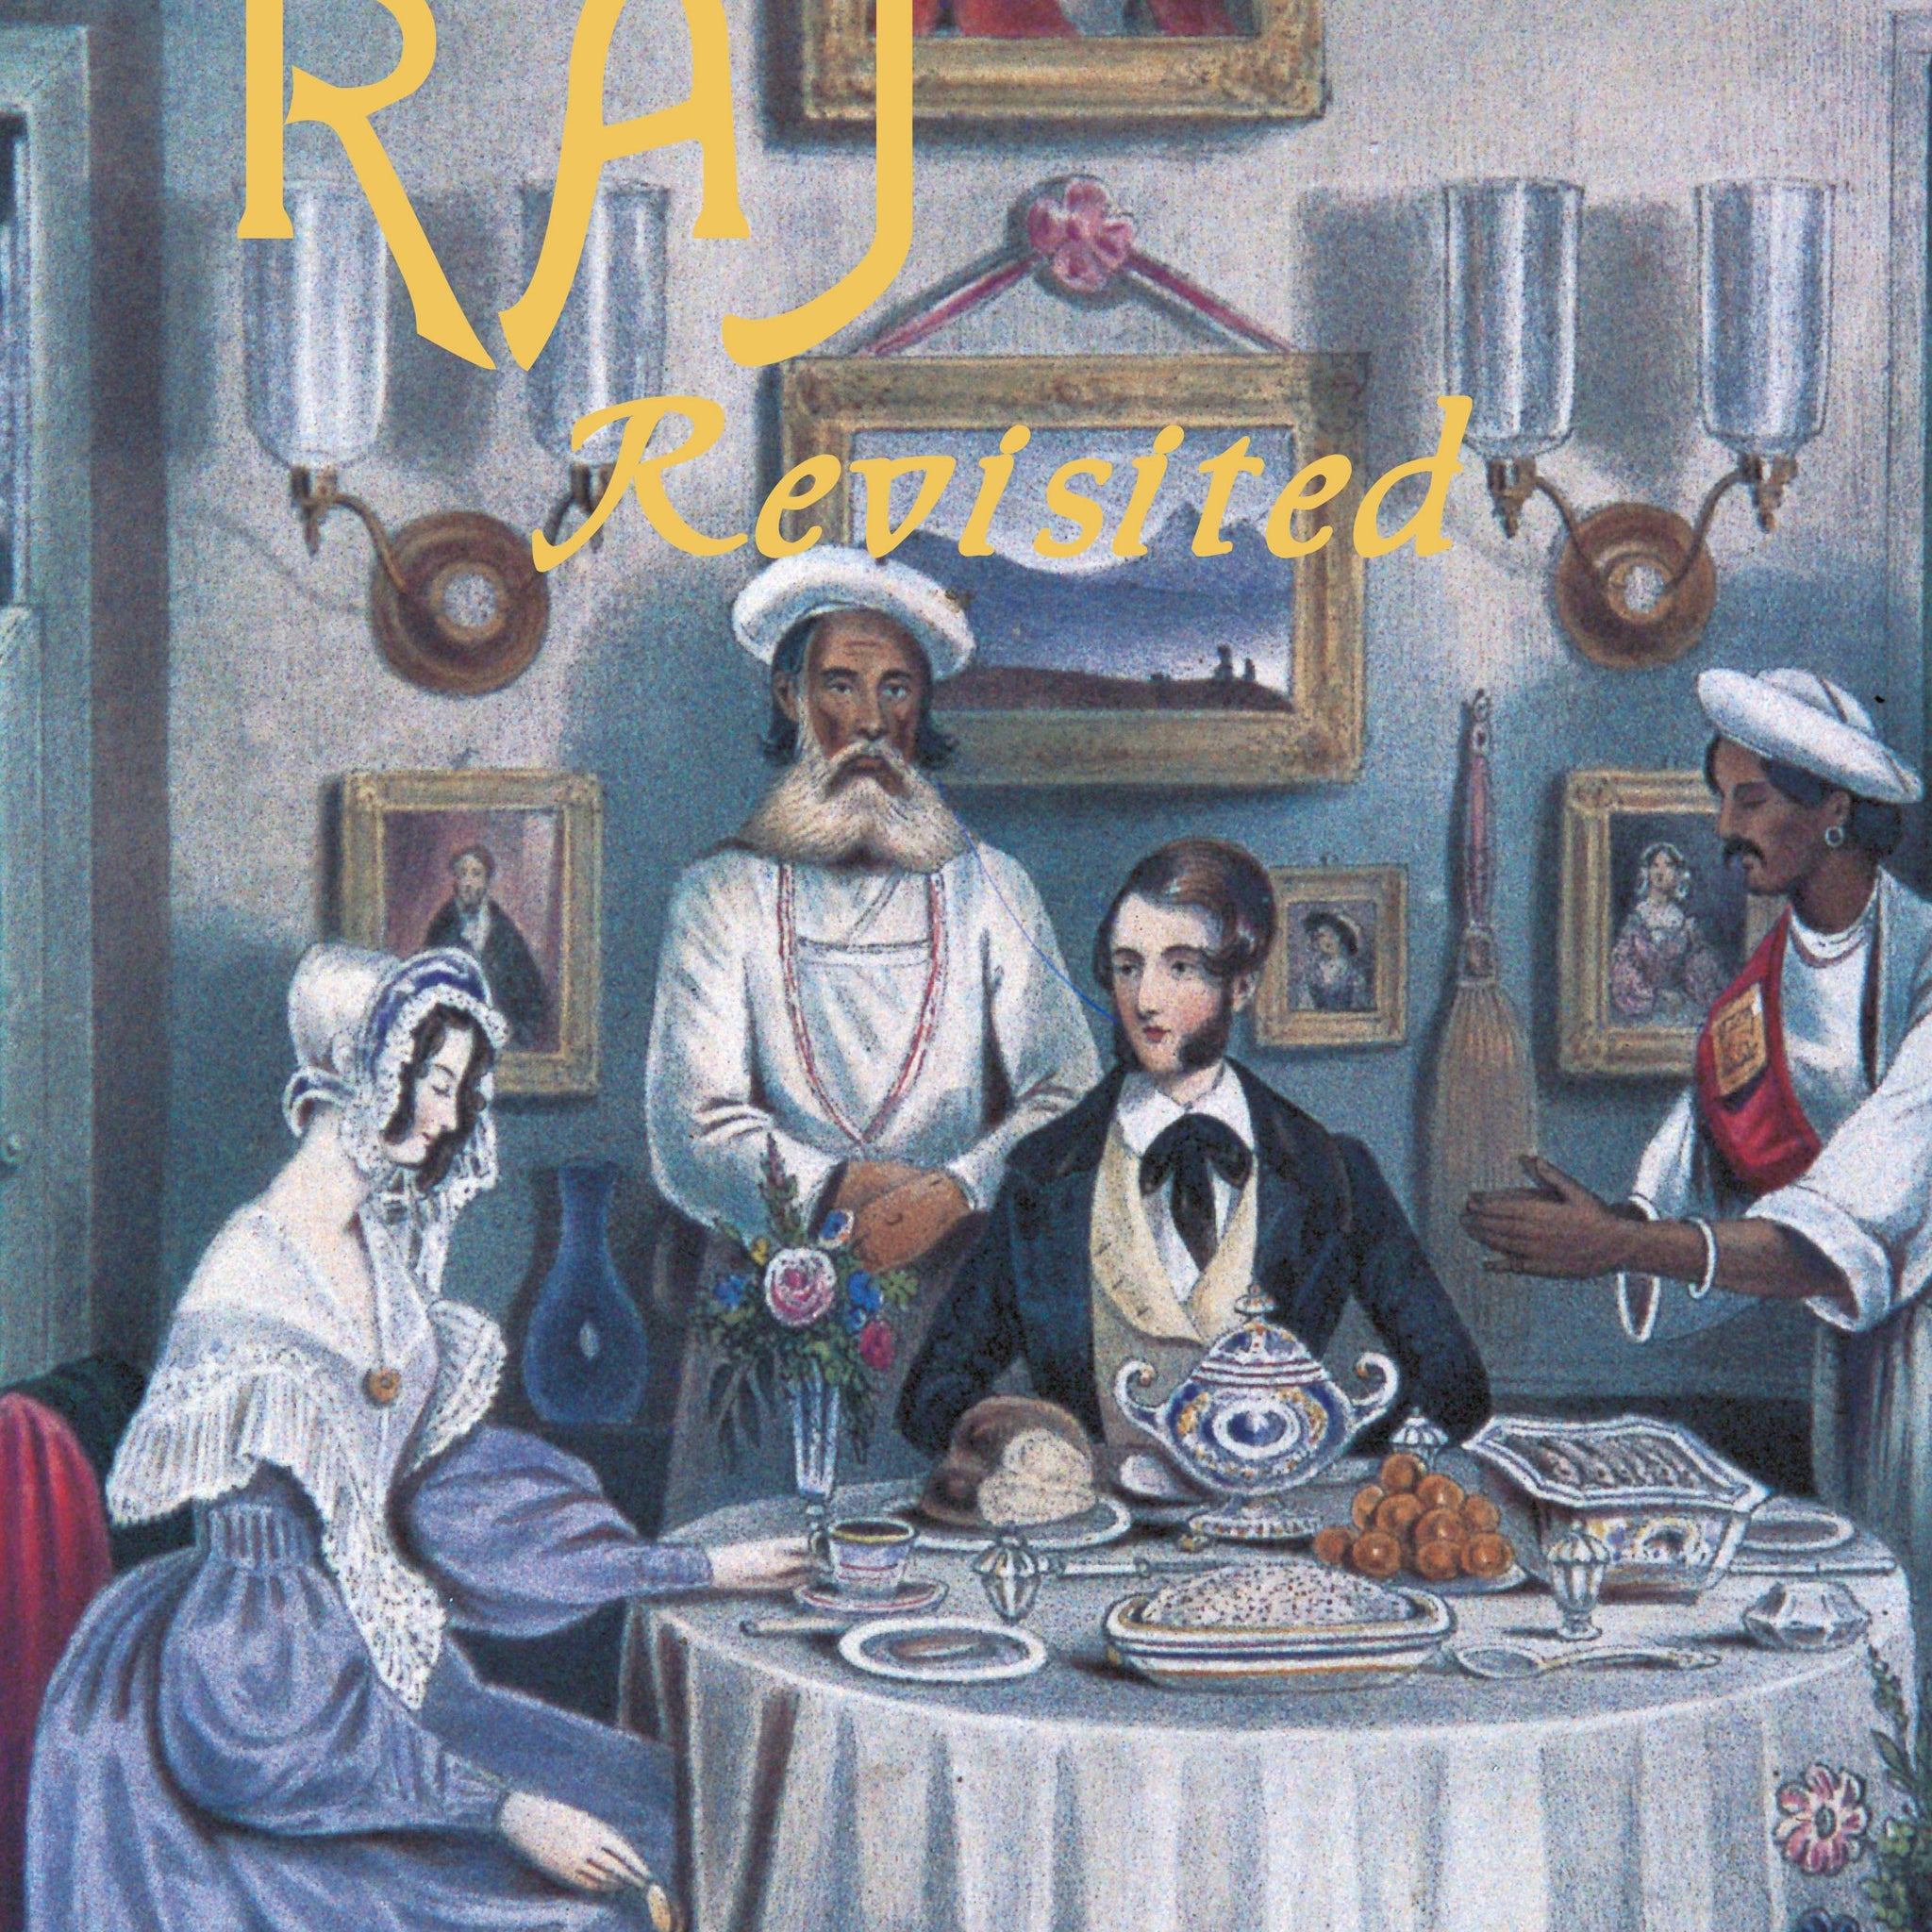 The Raj Revisited